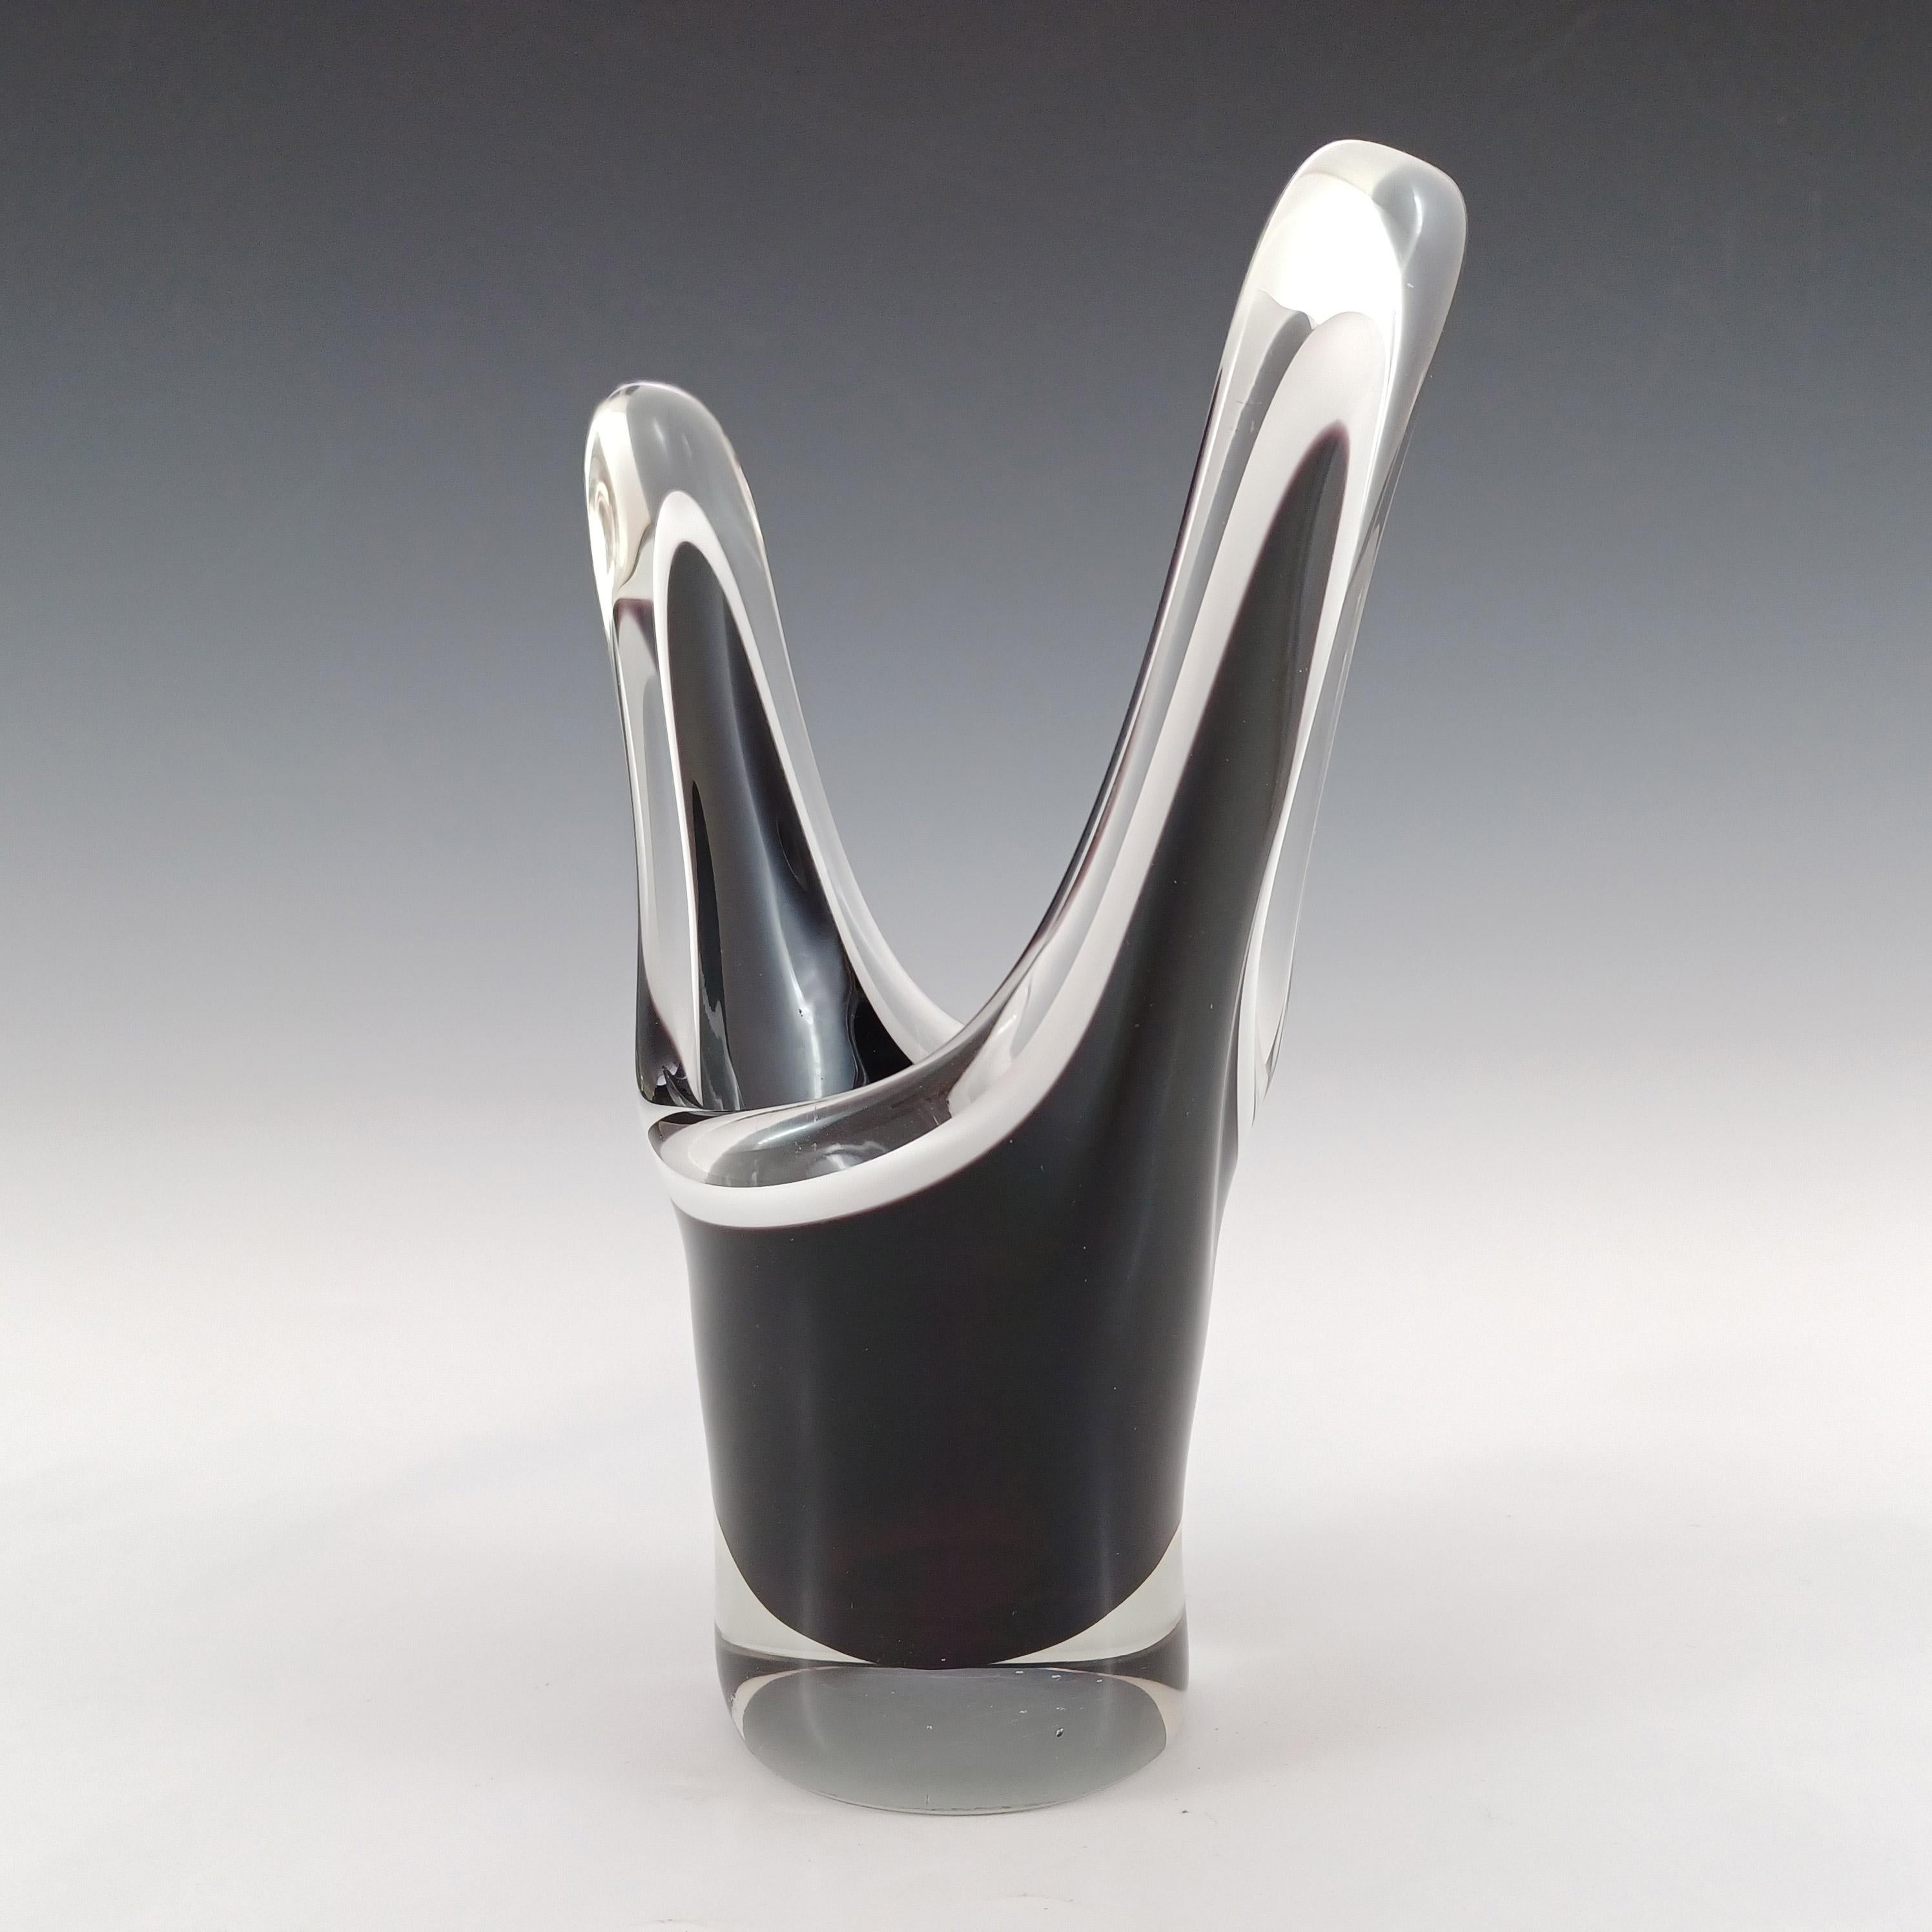 A stunning Scandinavian black & white cased glass sculpture vase. Made by Kumela of Finland in the 1960's, and designed by Sulo Grönberg, signed to base. The black glass is actually a very dark purple. Very similar in style to Paul Kedelv's